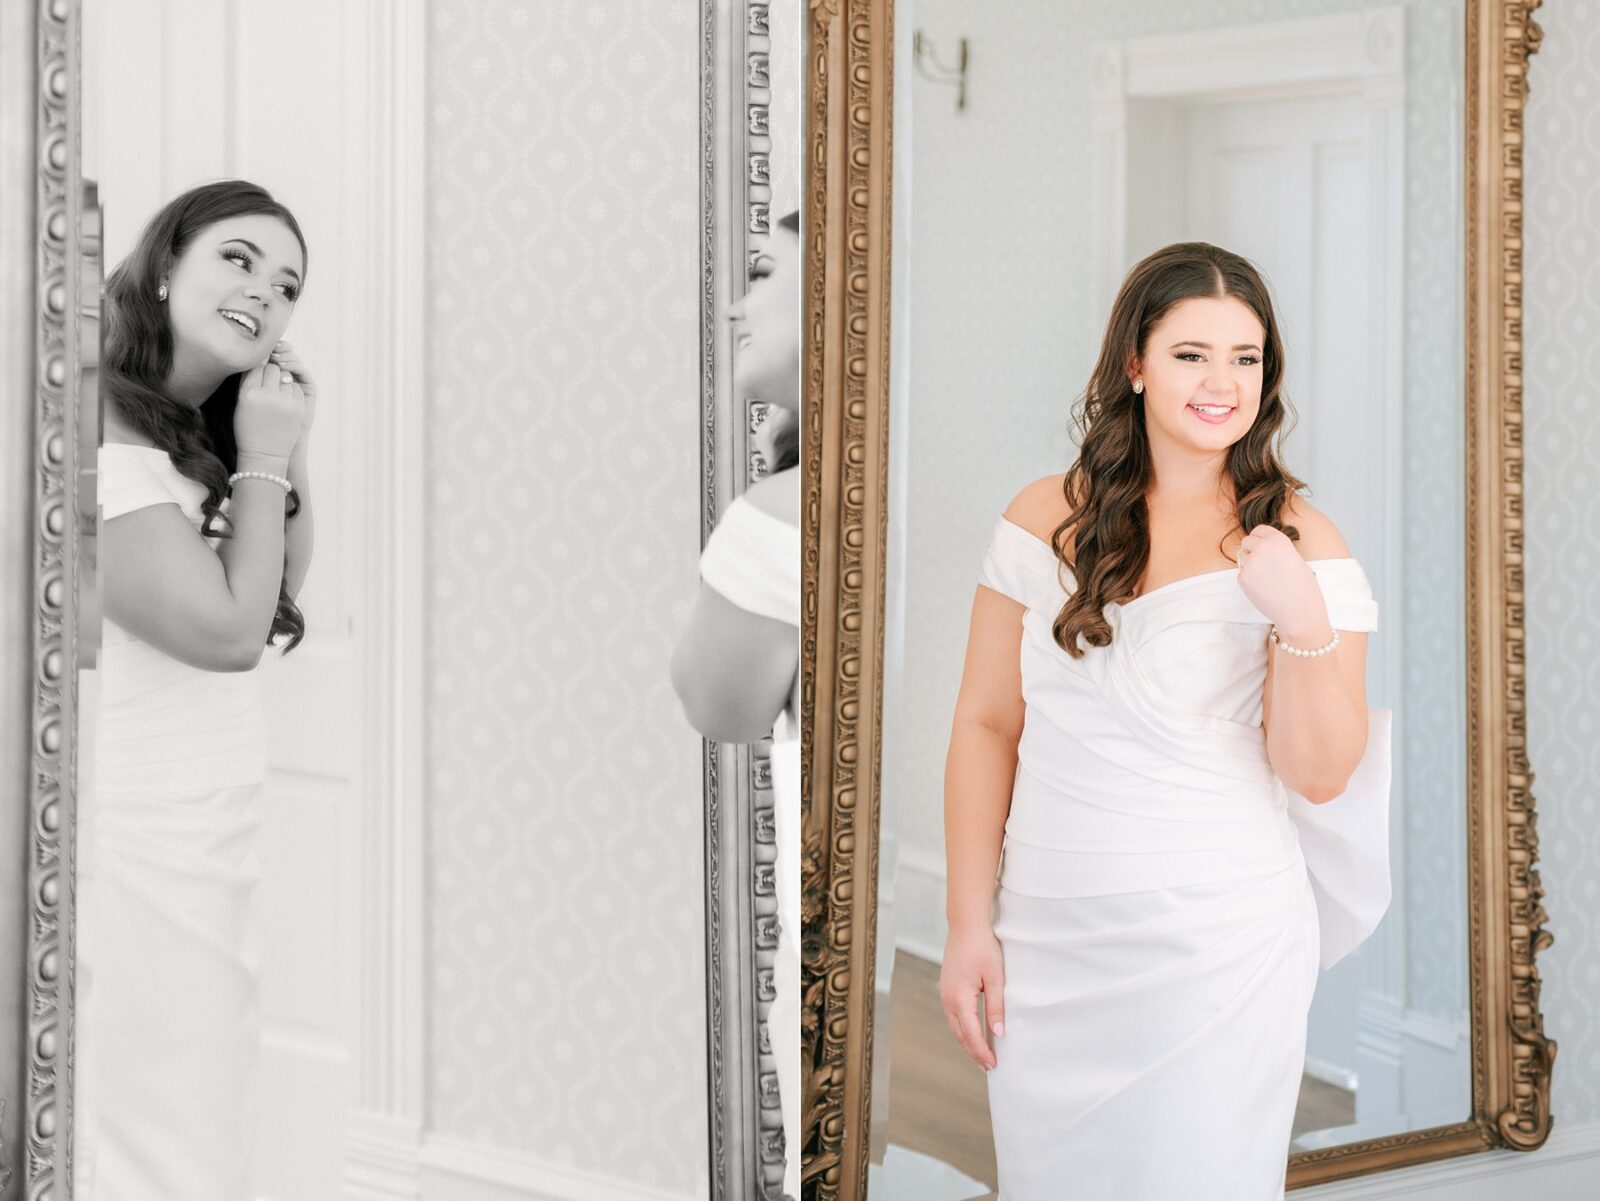 bride getting ready, bridal suite, getting ready area at woodbine mansion, at Woodbine mansion wedding venue, photography by Tara Lyons Photography, The event shop wedding planner